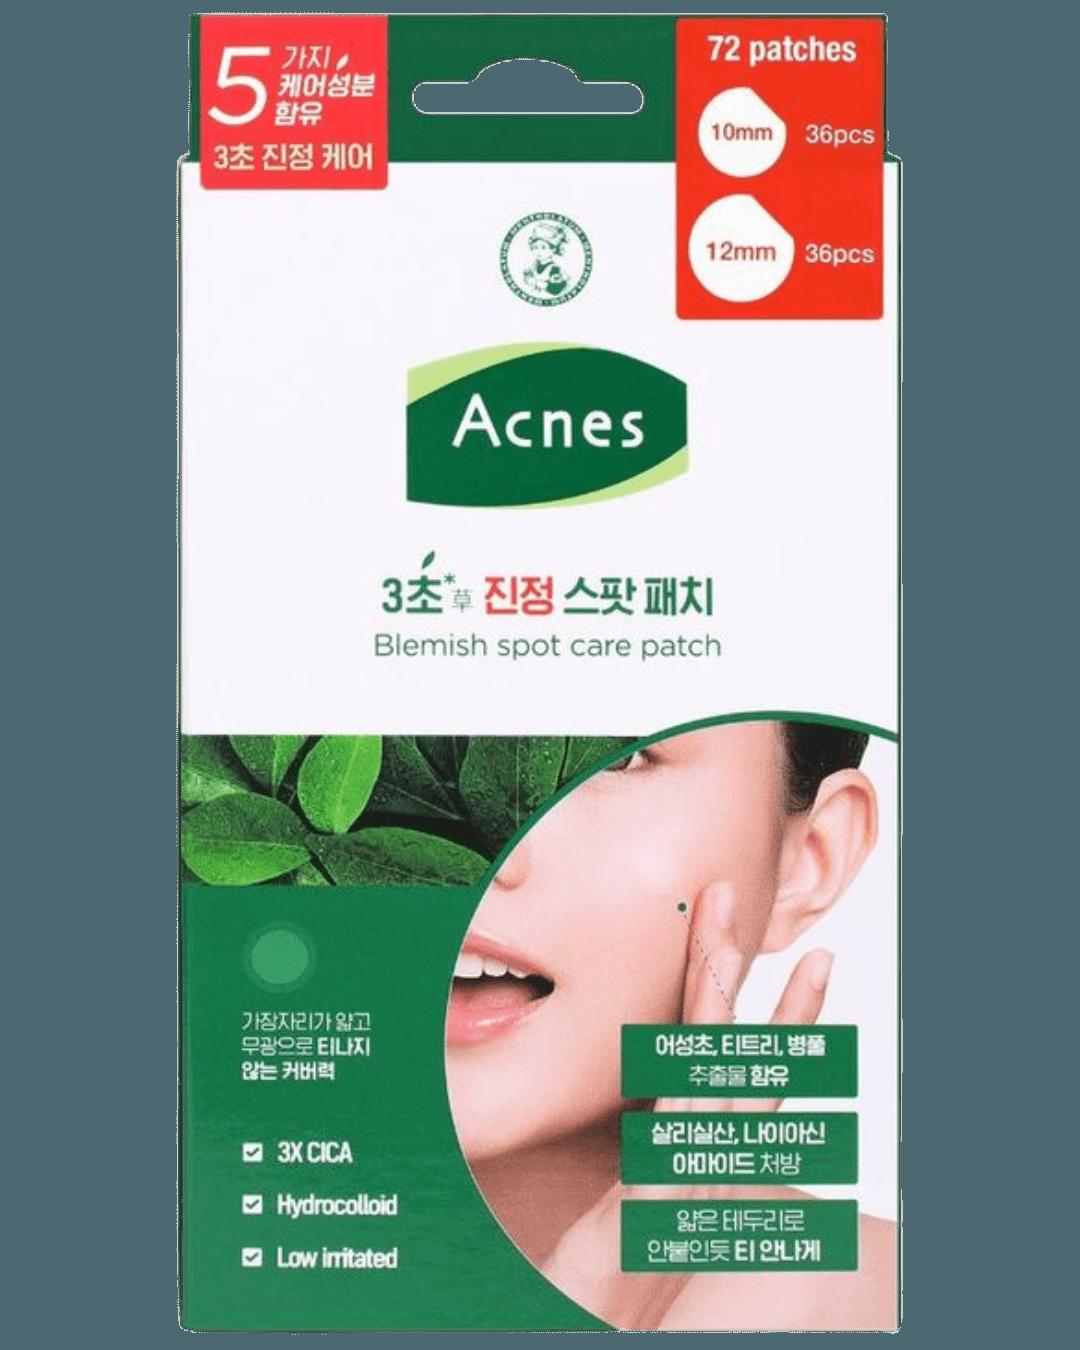 Daily Vanity Beauty Awards 2024 Best  Acnes Blemish Spot Care Patch 72s Voted By Beauty Experts